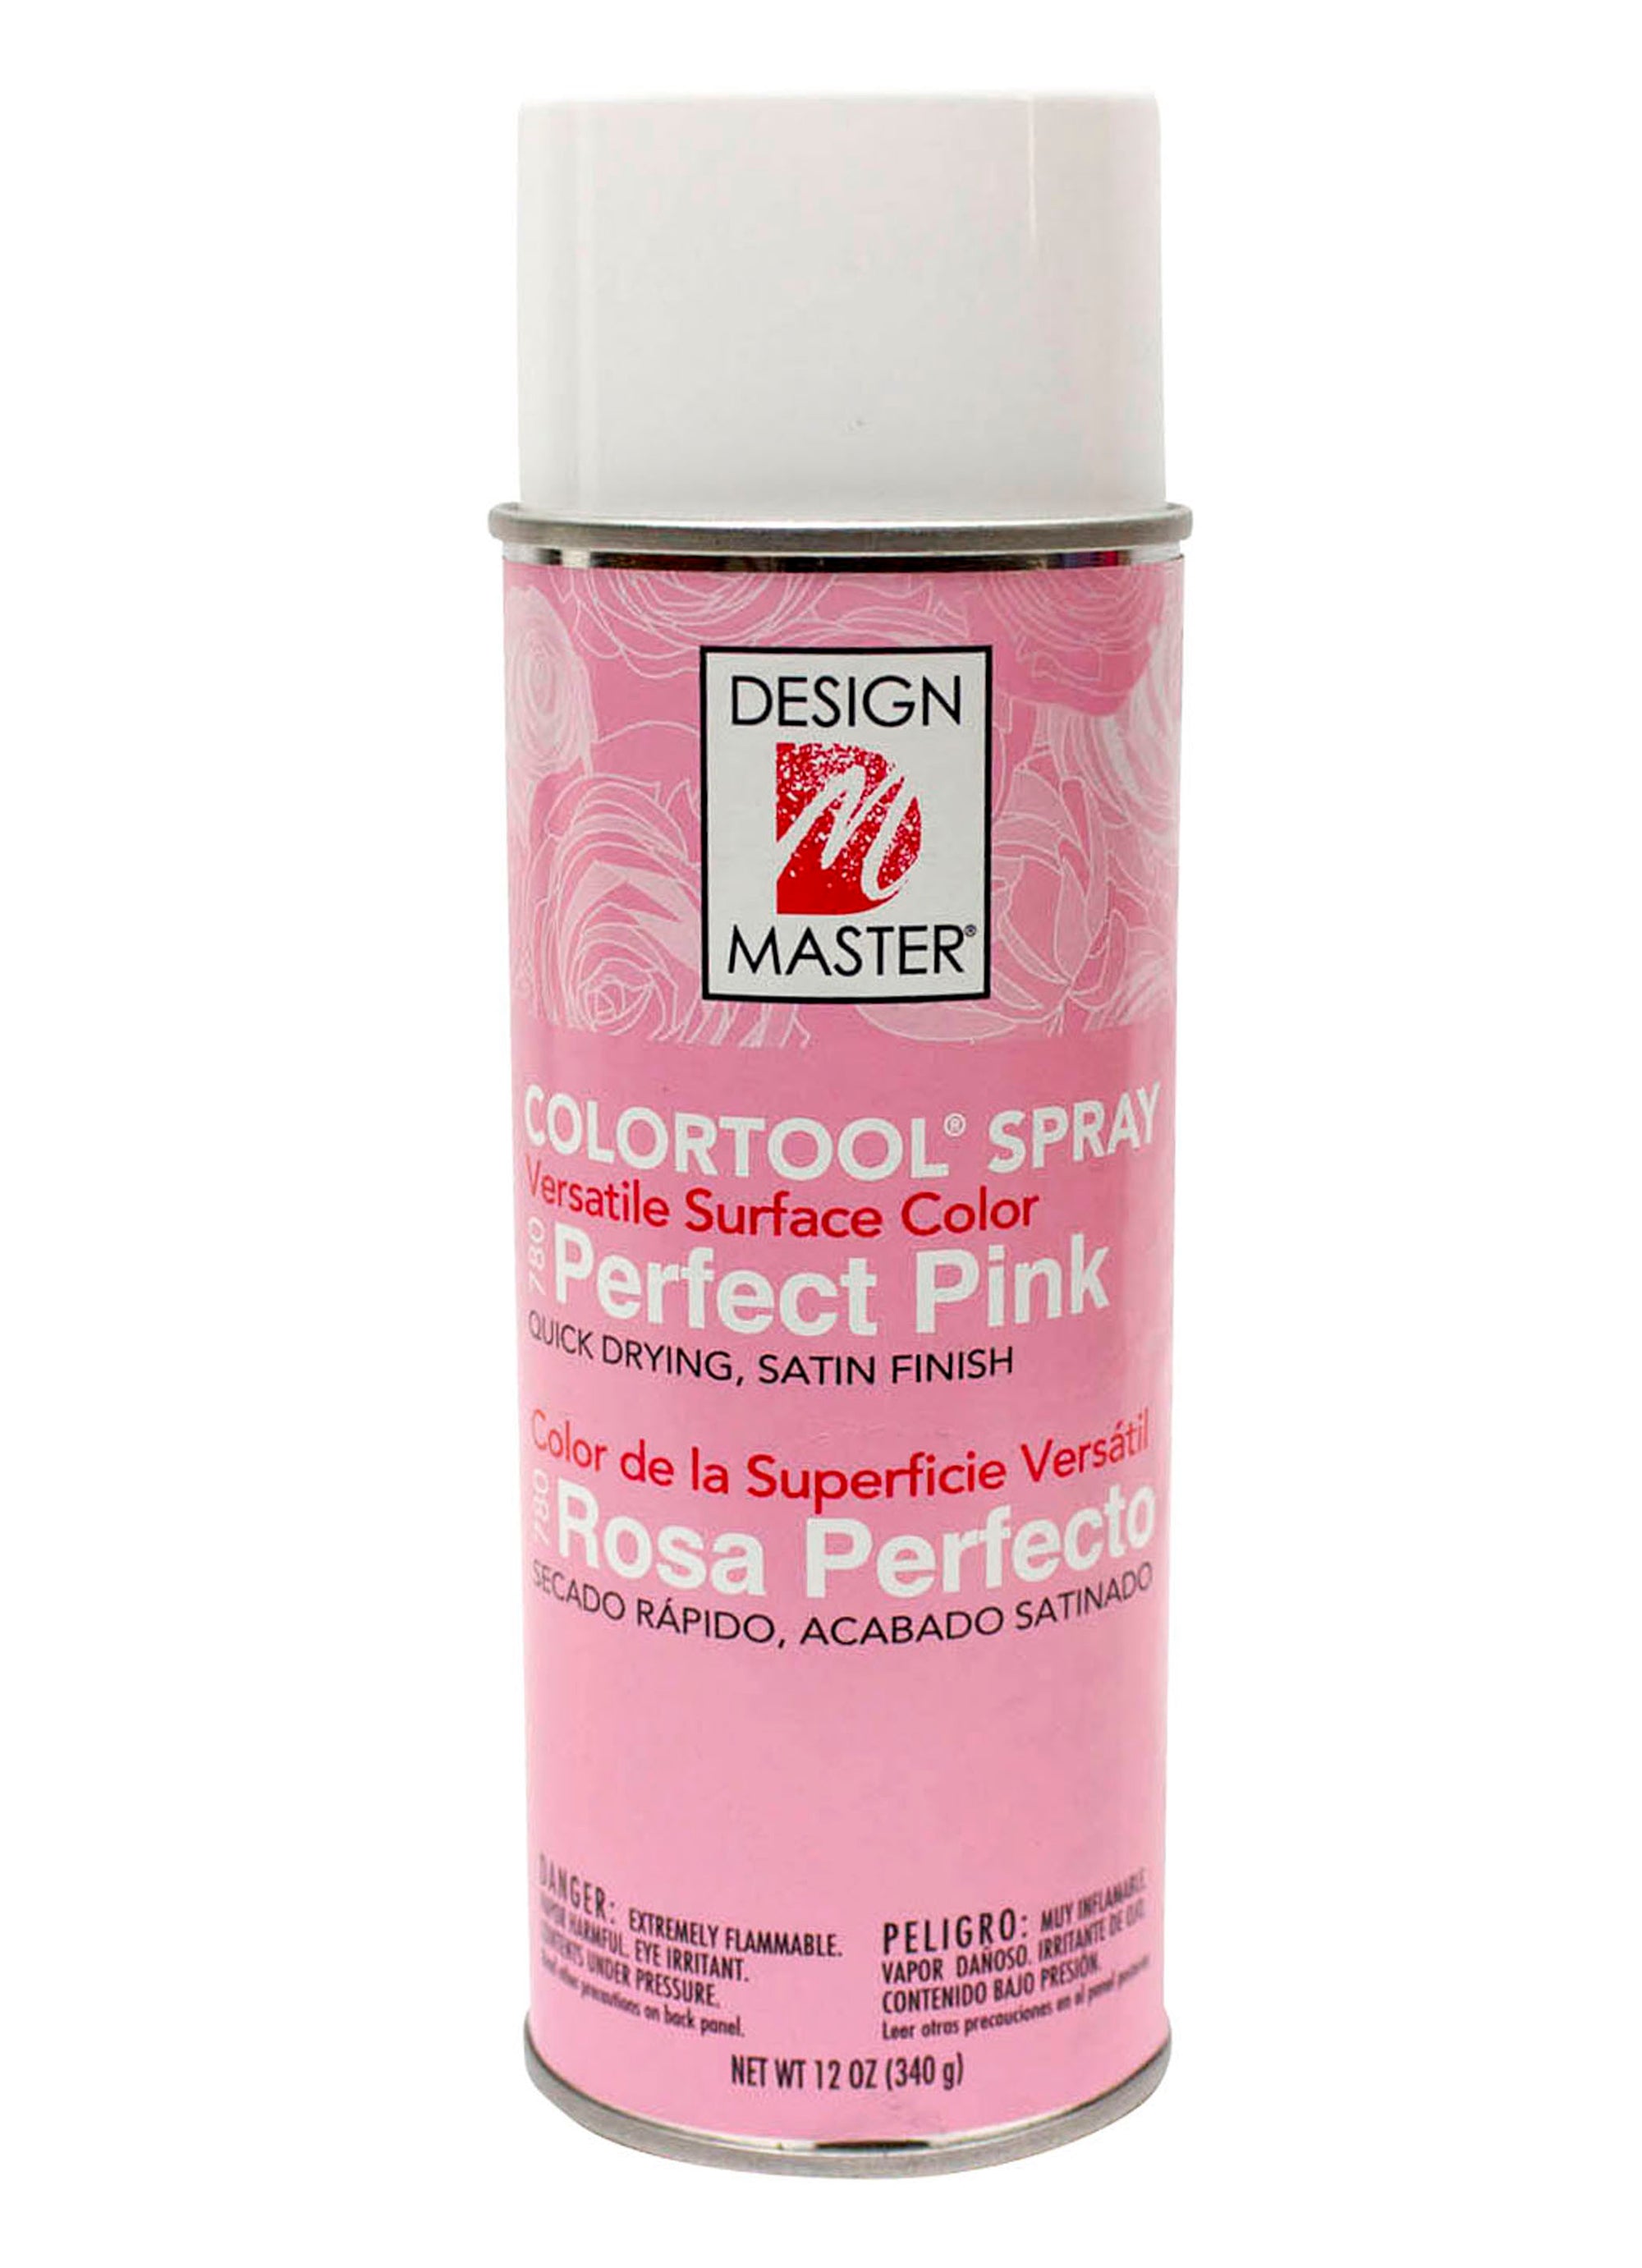 12 cans Color tool Floral Spray Paint - arts & crafts - by owner